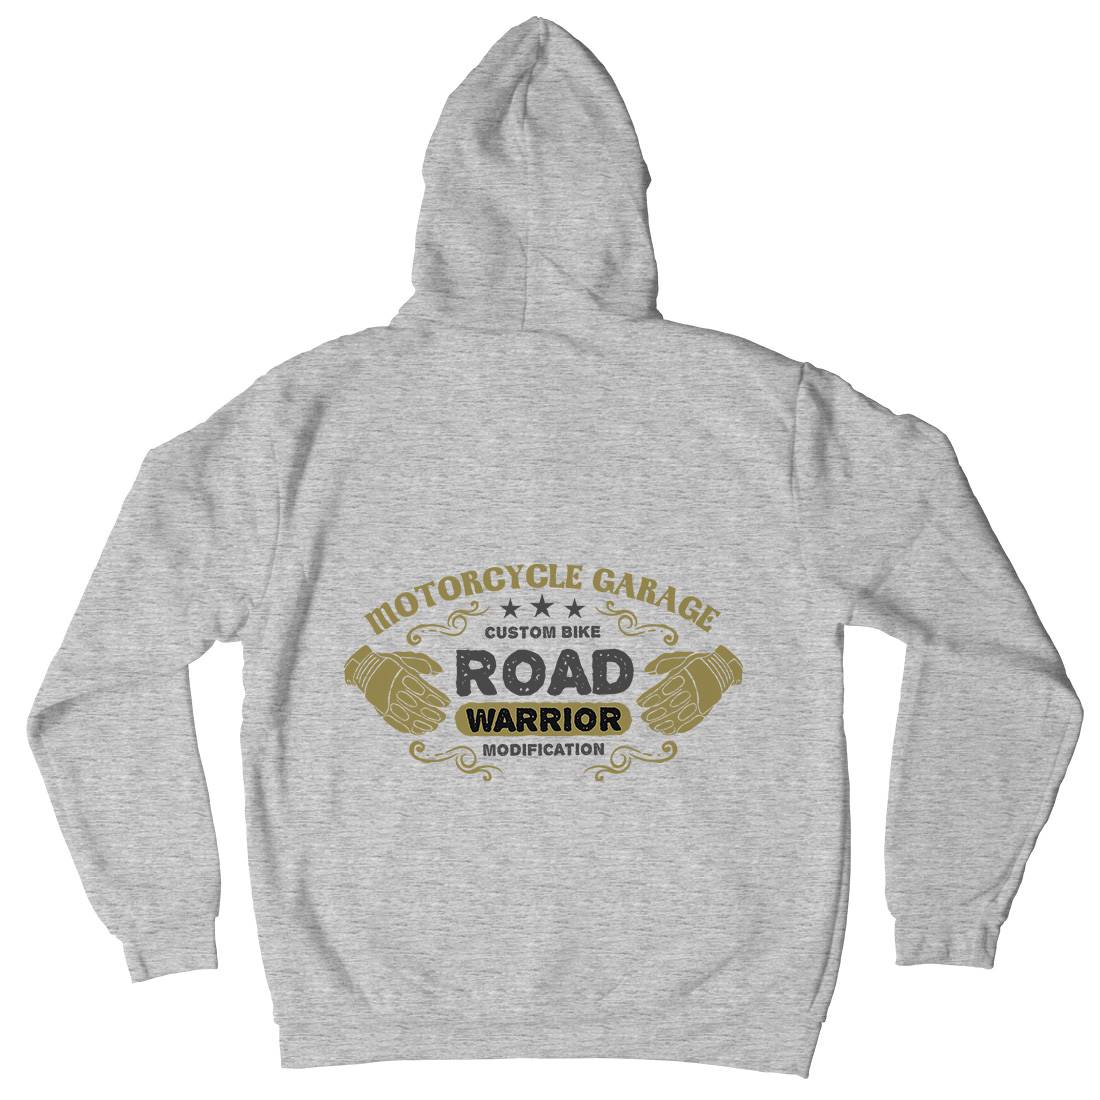 Garage Mens Hoodie With Pocket Motorcycles A348